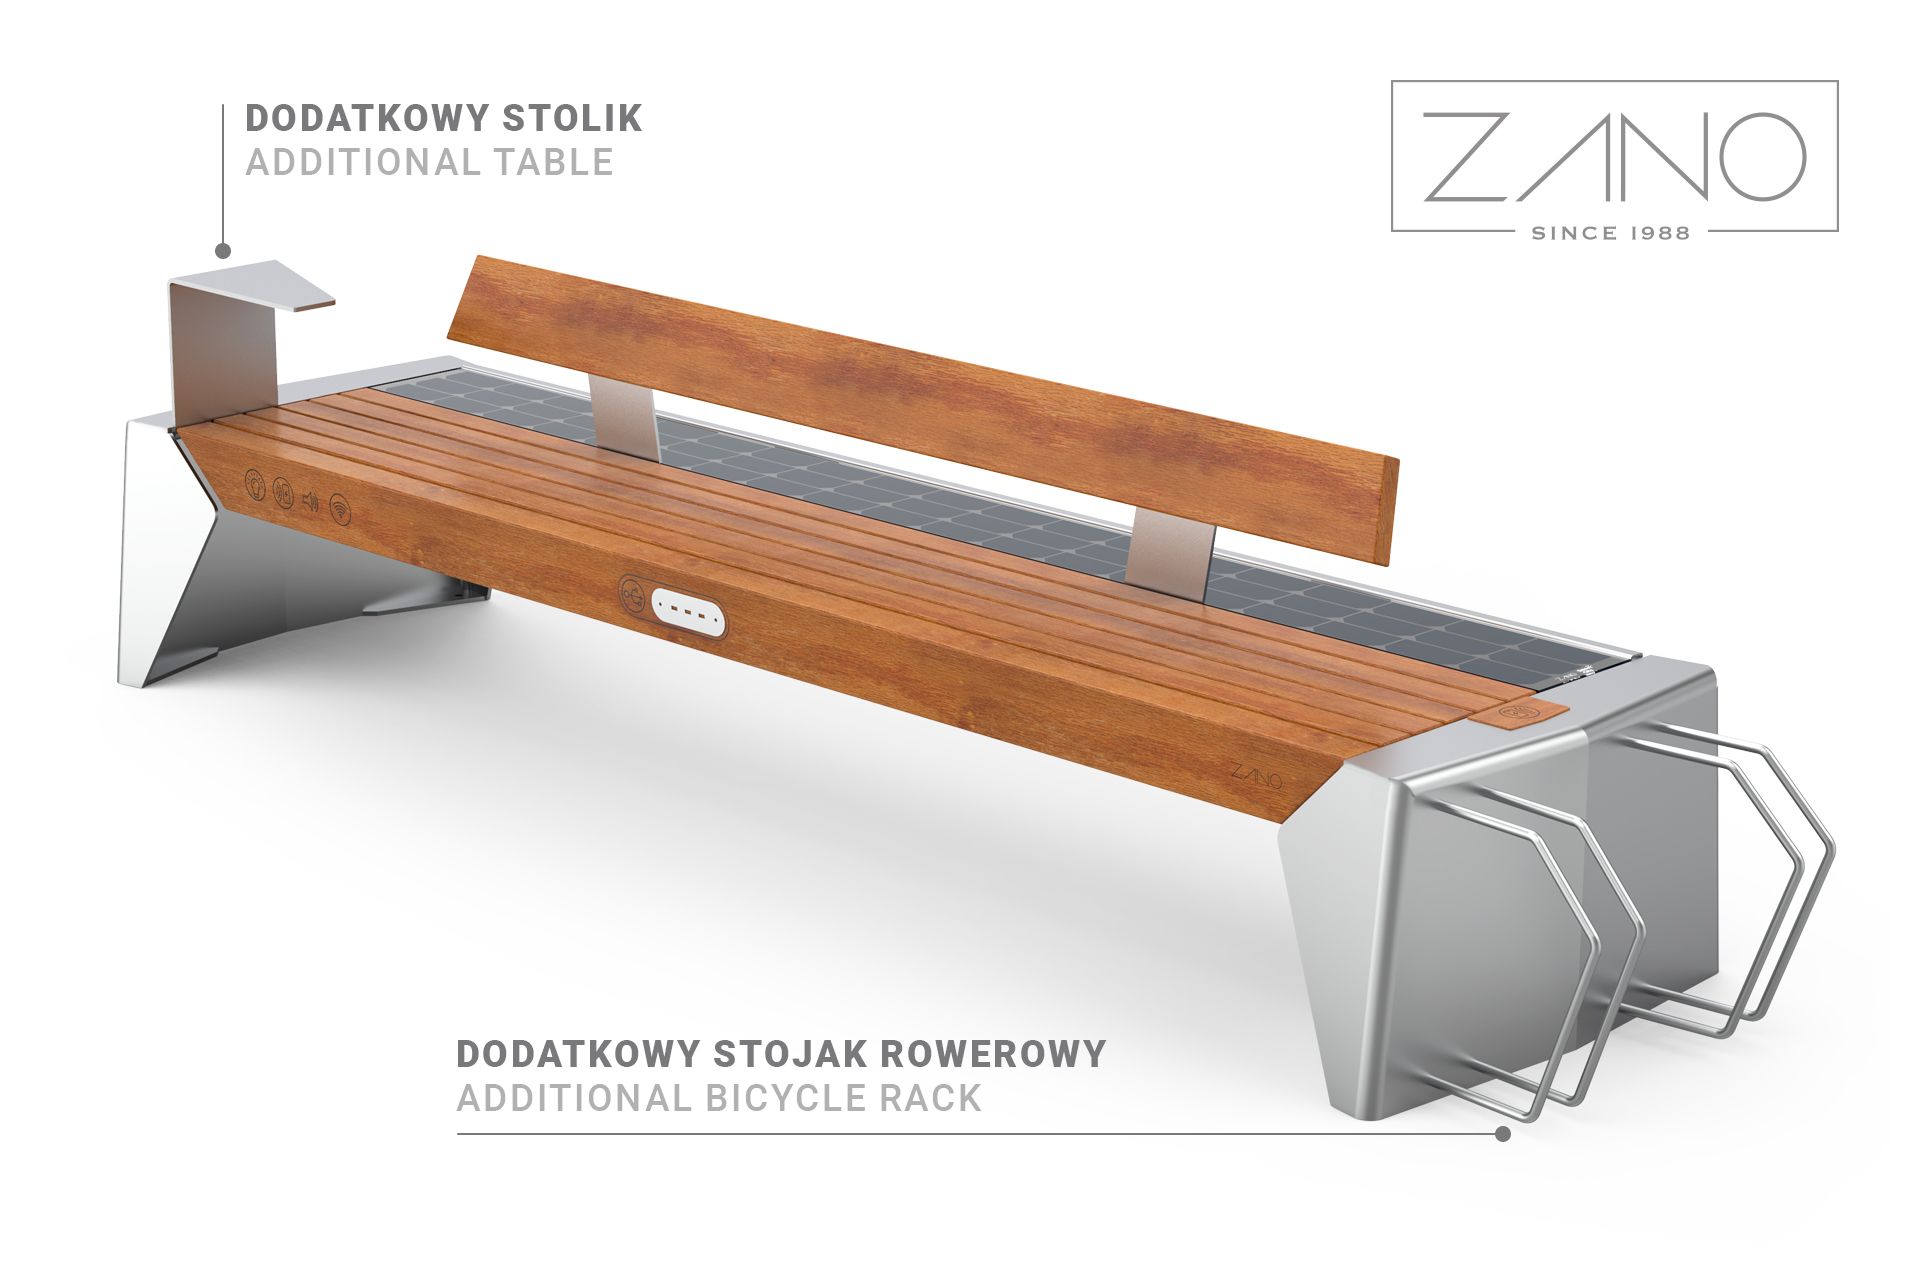 Photon solar bench 02.009.3 | additional table and bicycle stand